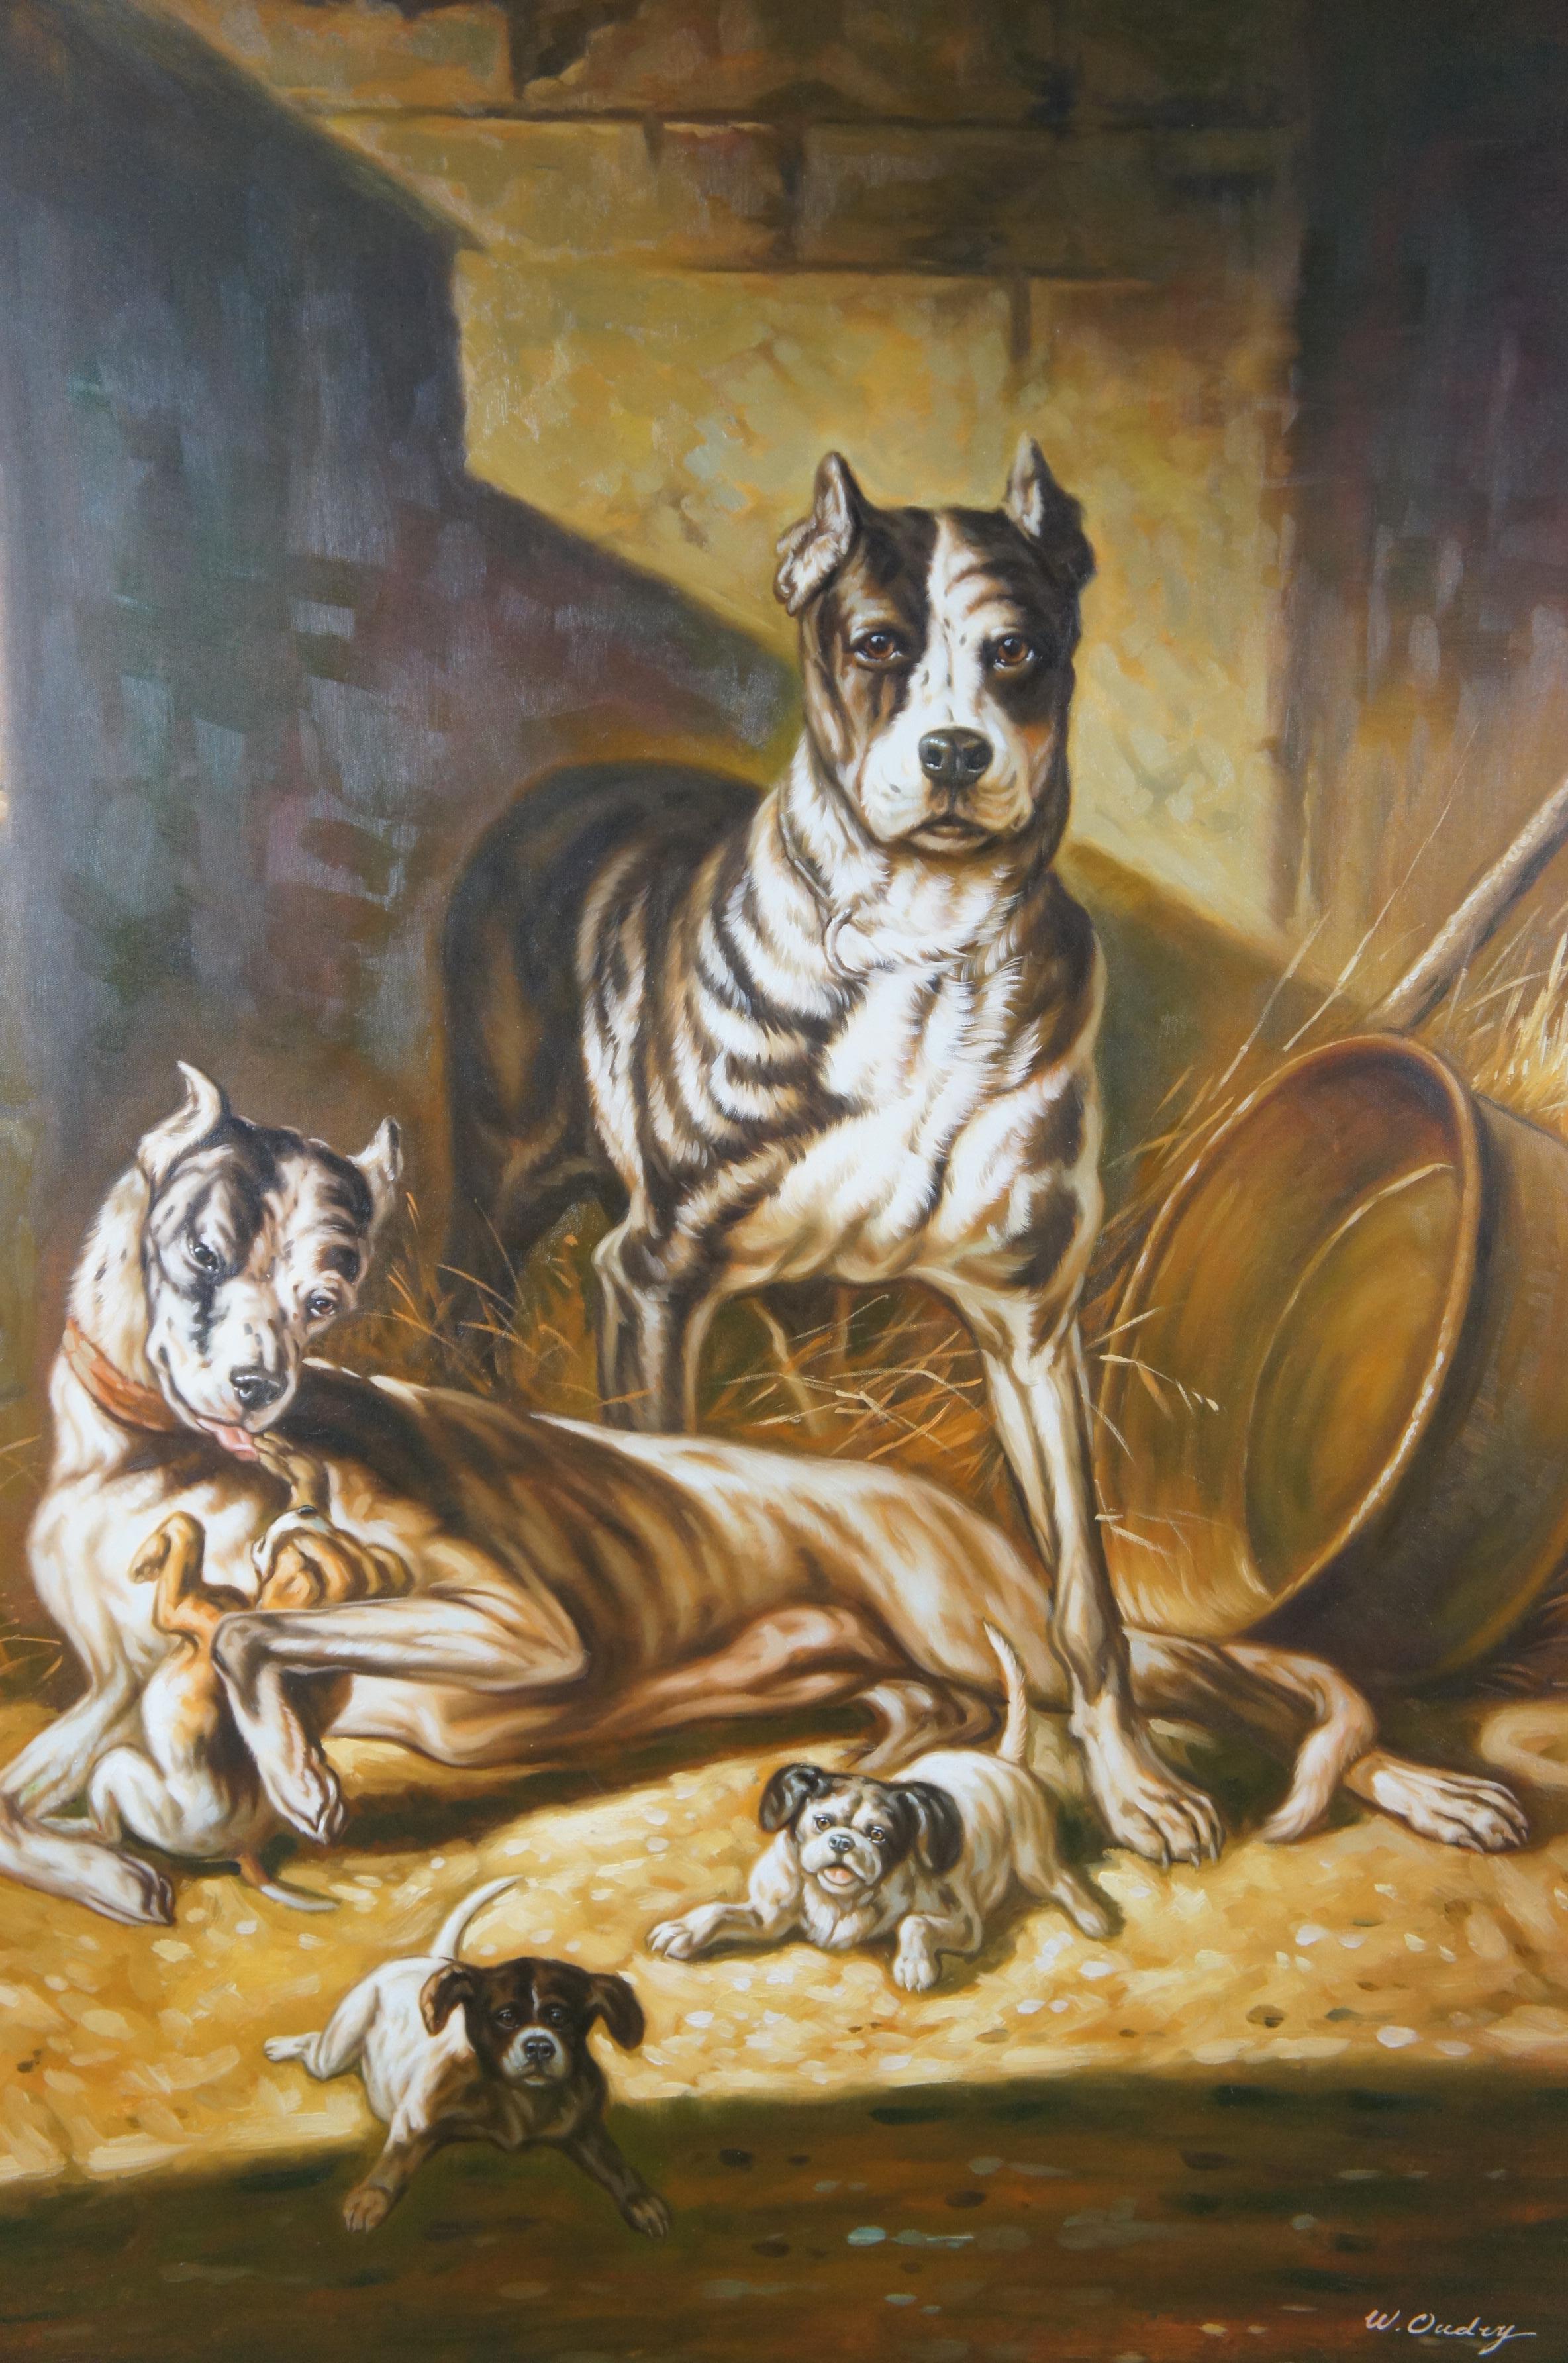 20th Century W Oudry English Bulldog Dog Family Portrait Oil Painting on Canvas 51